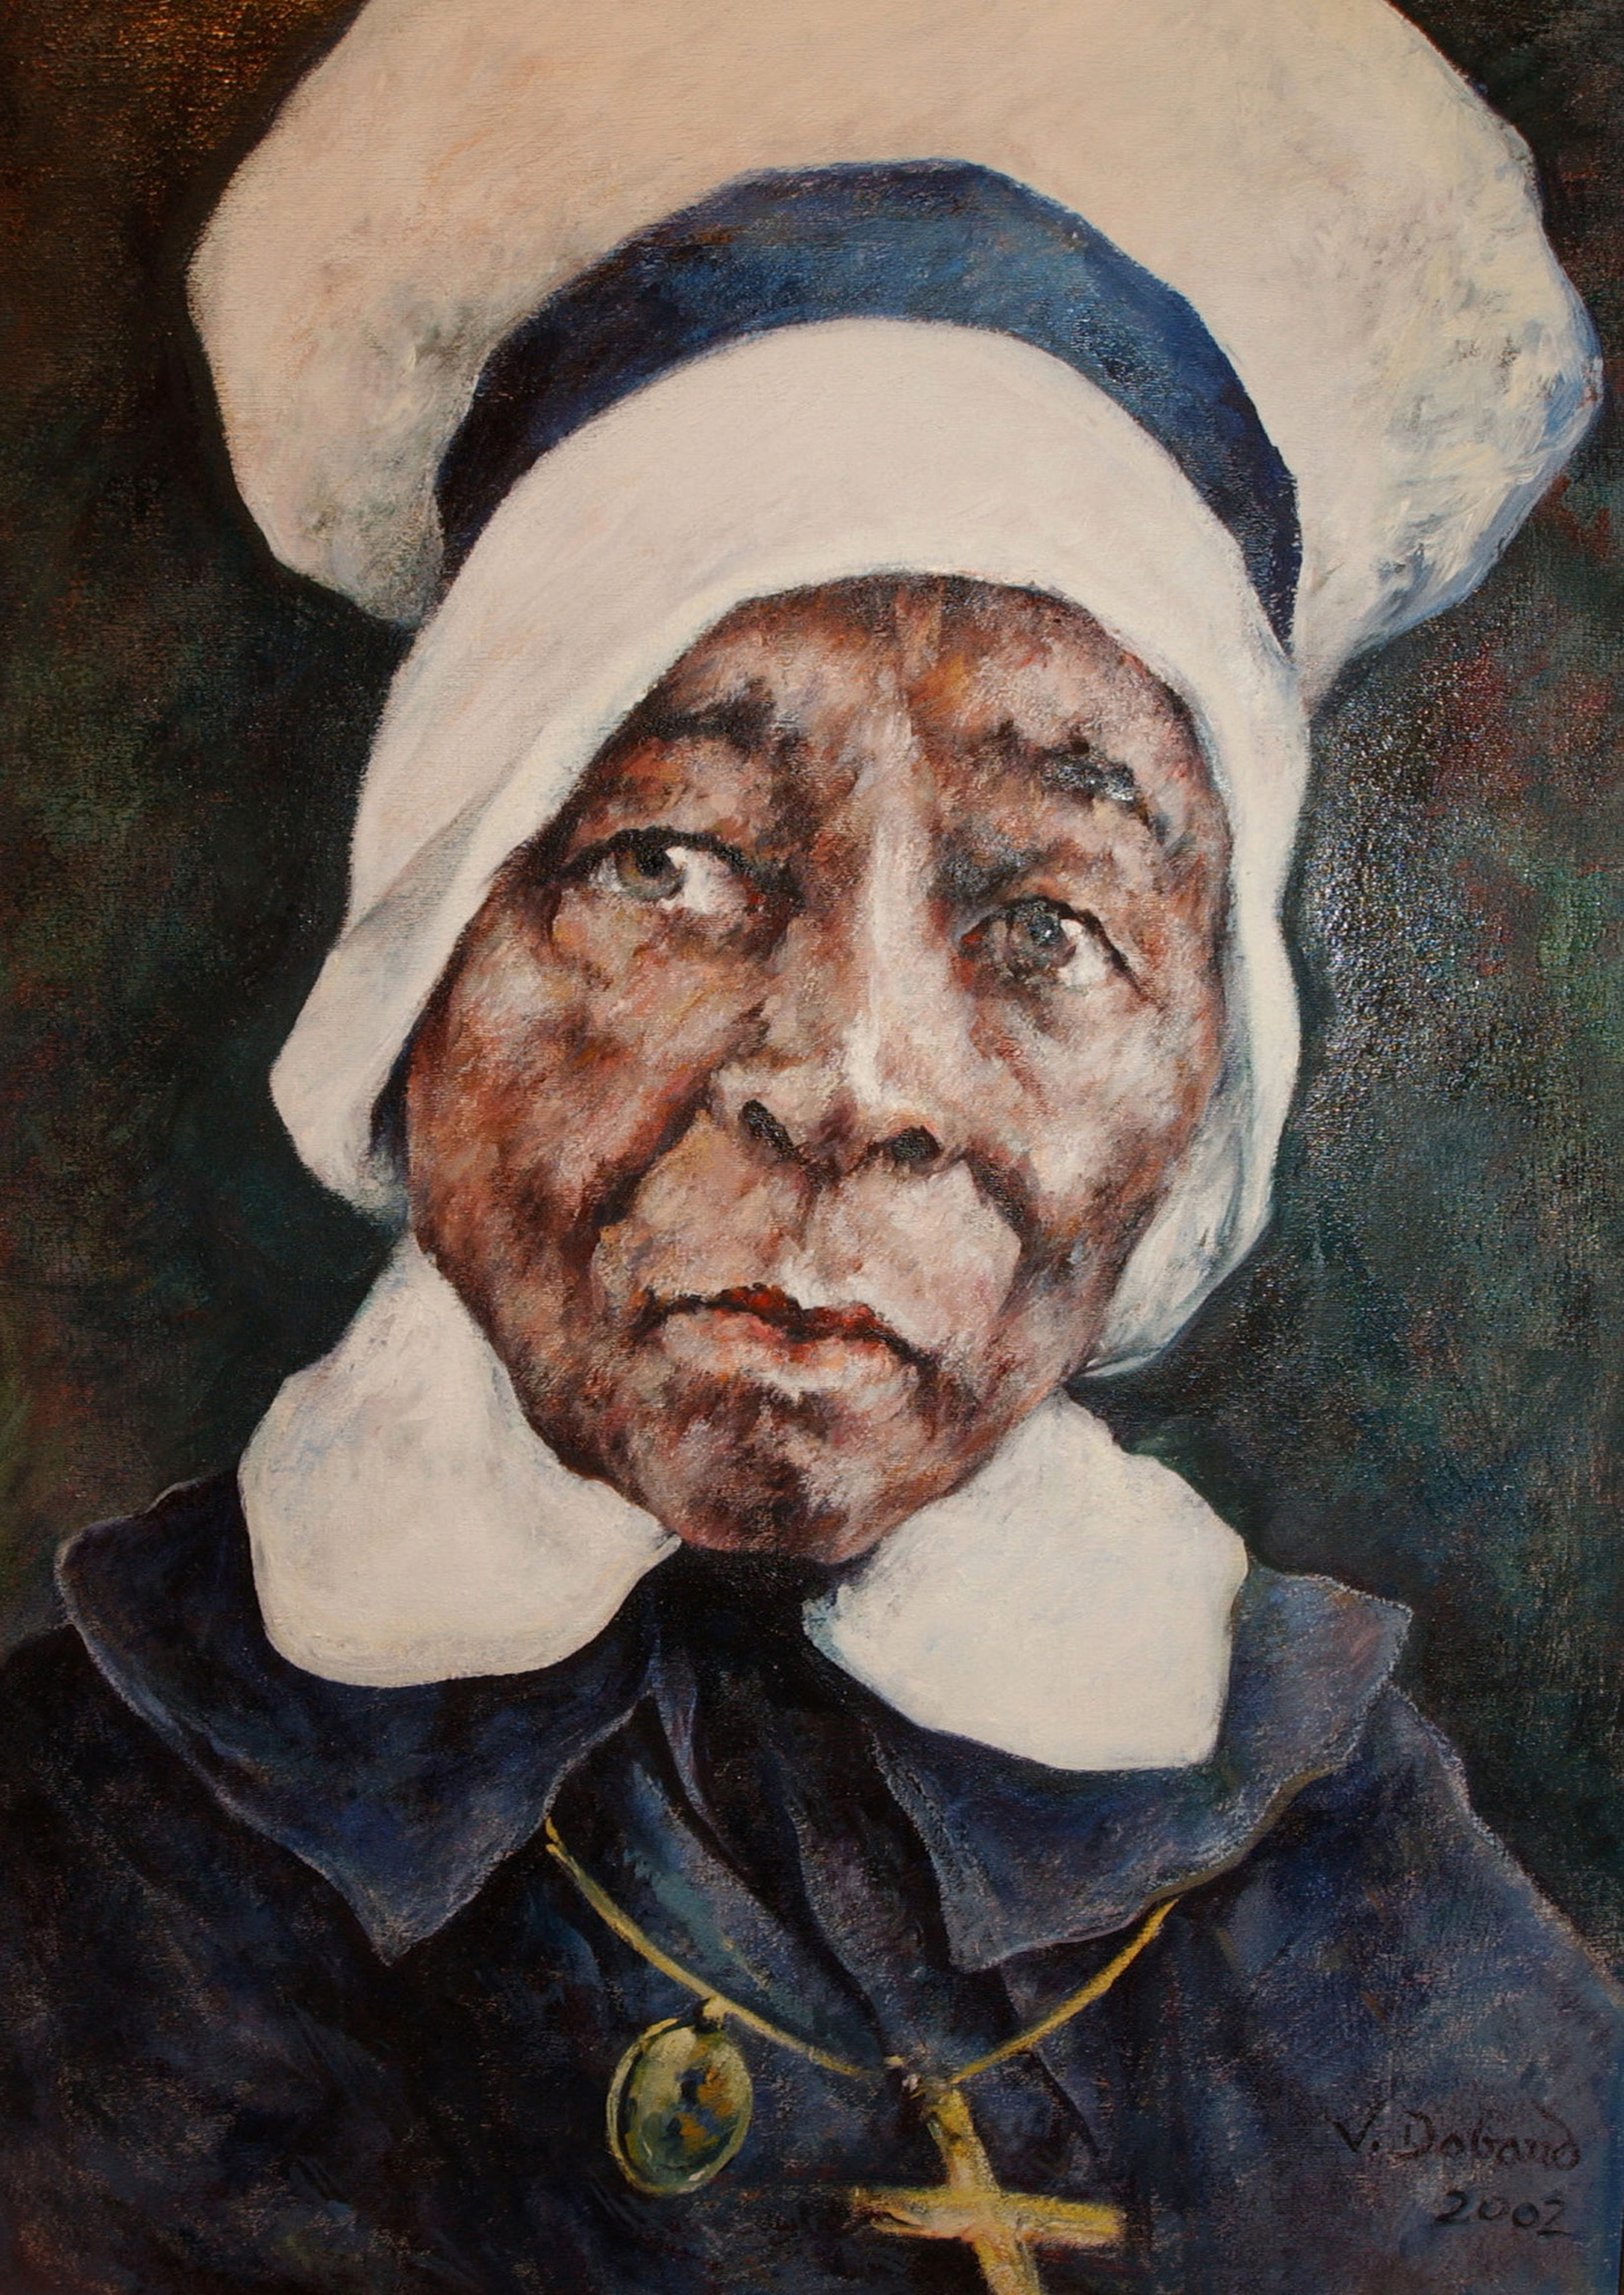 Servant of God Mary Lange: Founded first U.S. order for black sisters